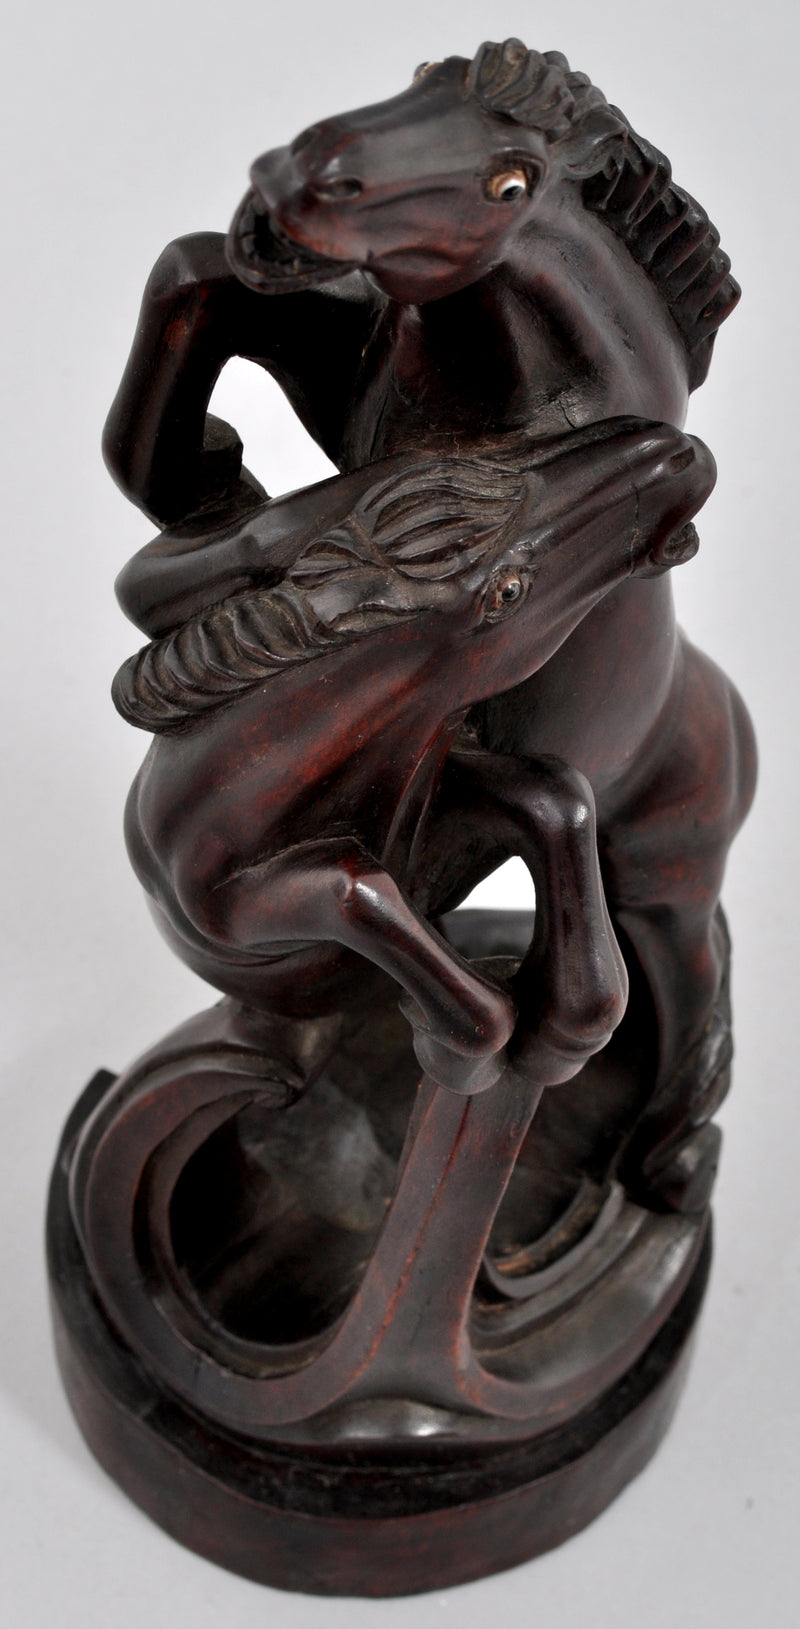 Antique Chinese Carved Ebony Horse Statue / Sculpture, Circa 1880